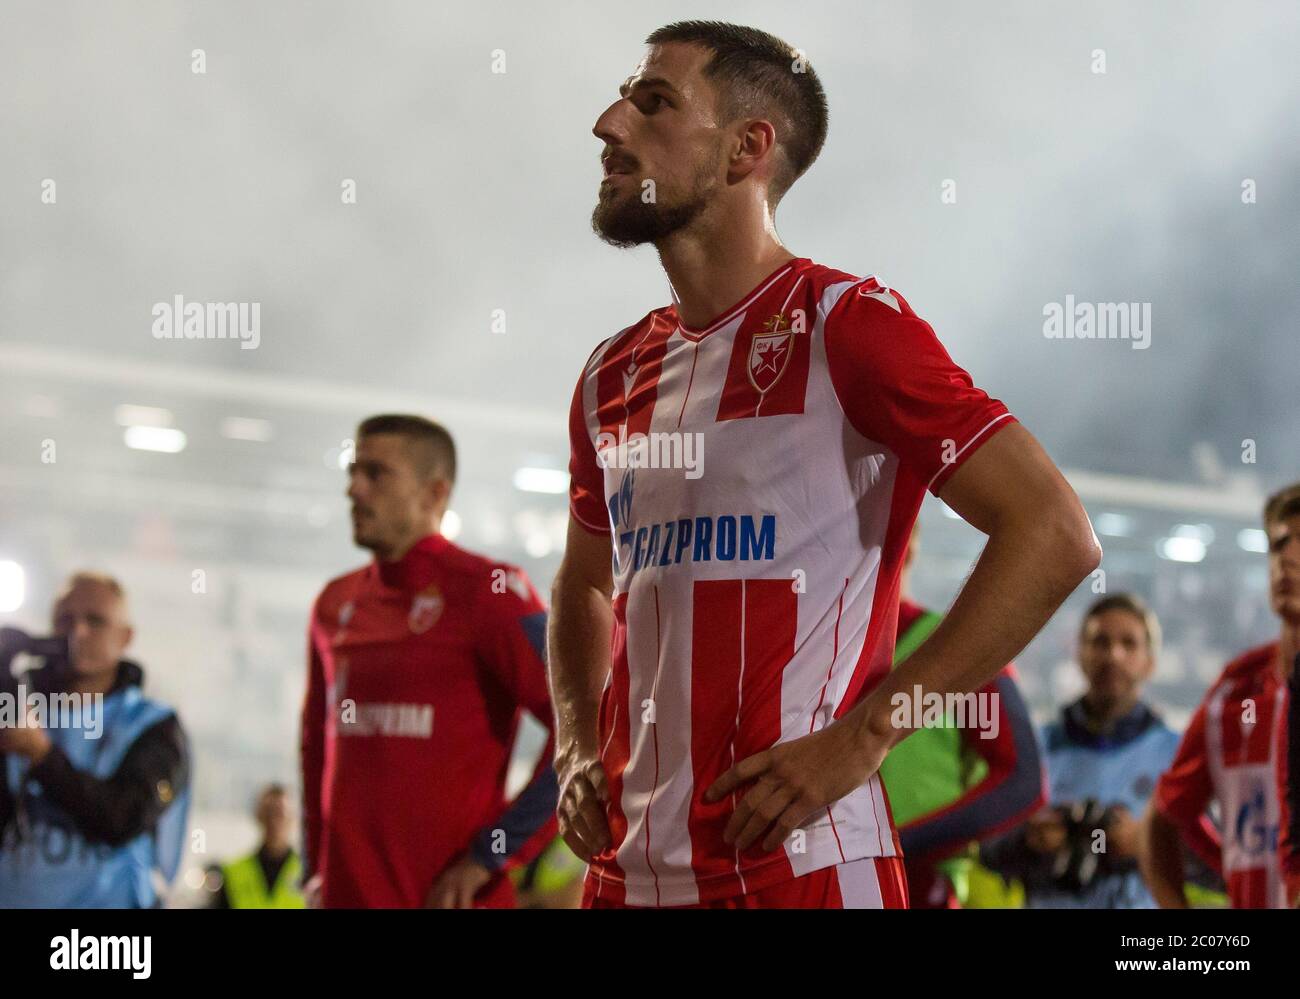 BELGRADE, SERBIA - JUNE 10:  during the Semifinal Serbian Cup match between Red Star Belgrade and Partizan Belgrade at Partizan Stadium on June 10, 2020 in Belgrade, Serbia. (Photo by Nikola Krstic/MB Media/Getty Images) Stock Photo